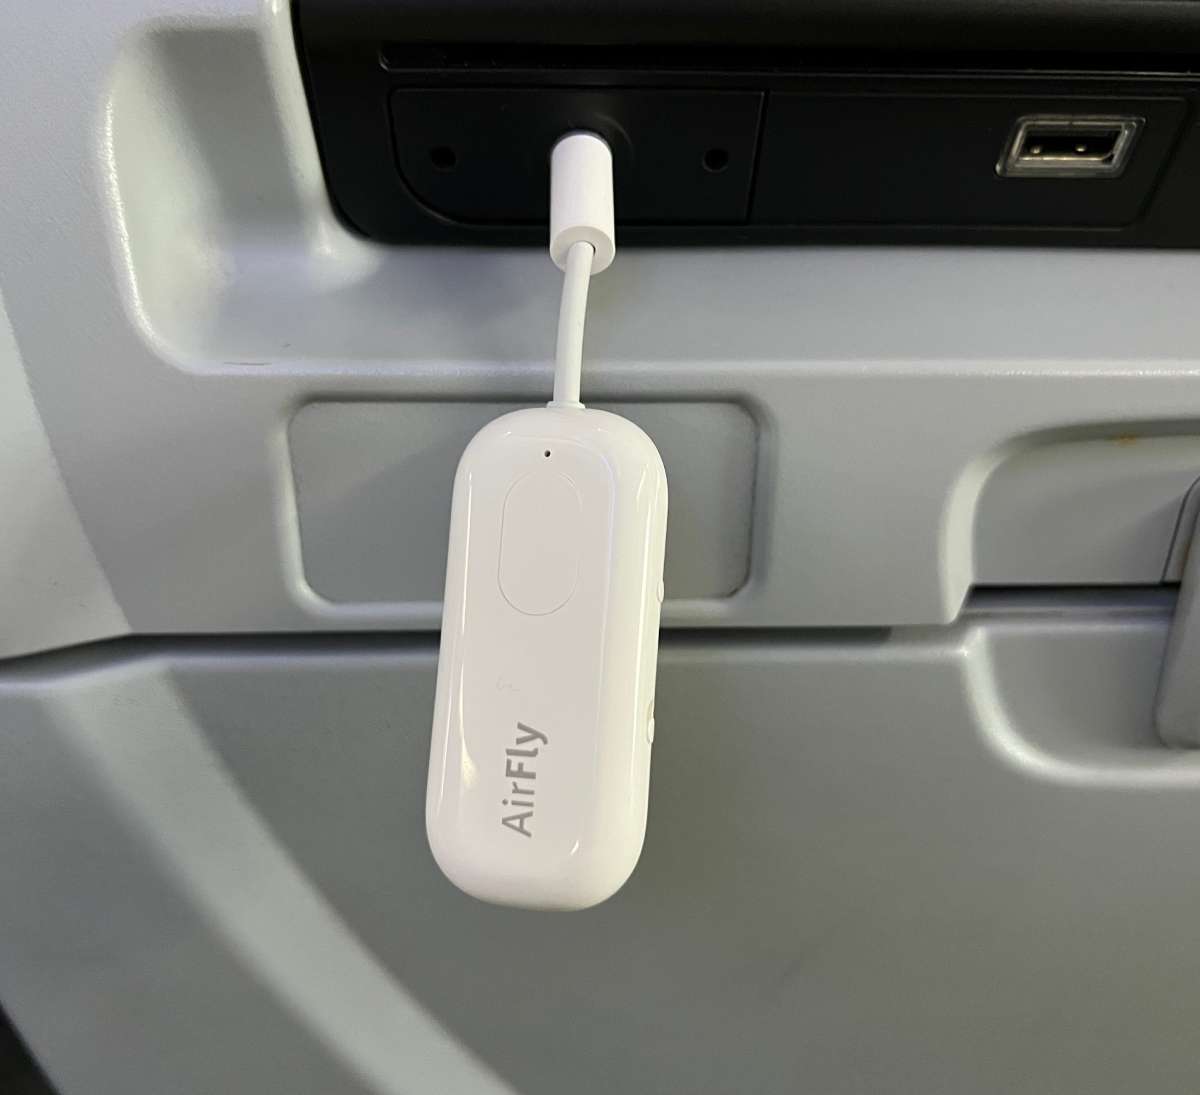 Product Review: Airfly Pro Bluetooth Adapter for Airplane IFE - Travel  Season